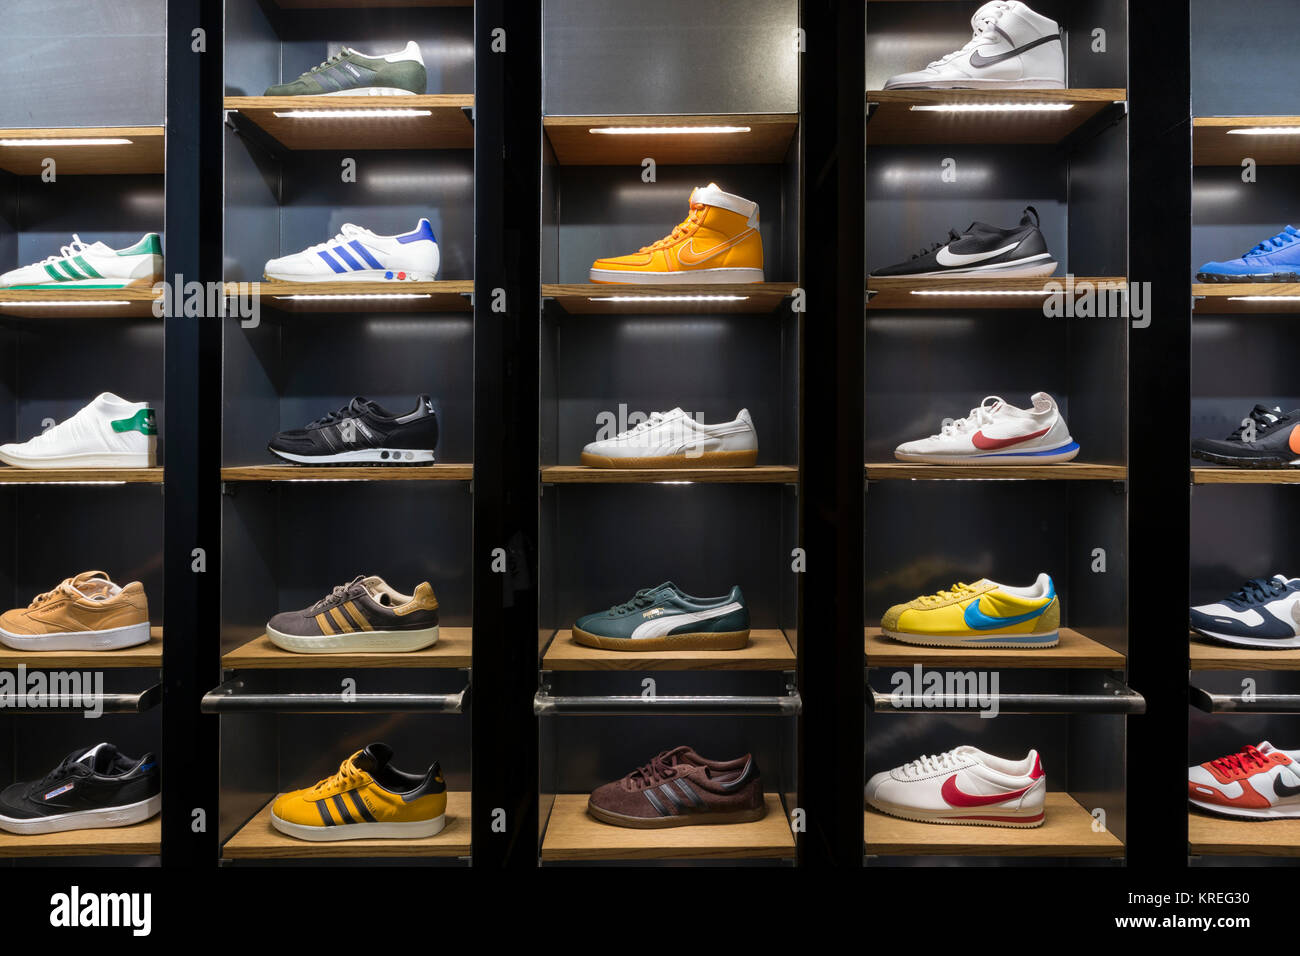 Sneakers shoes in shelves of a store, Milano, Italy Stock Photo - Alamy